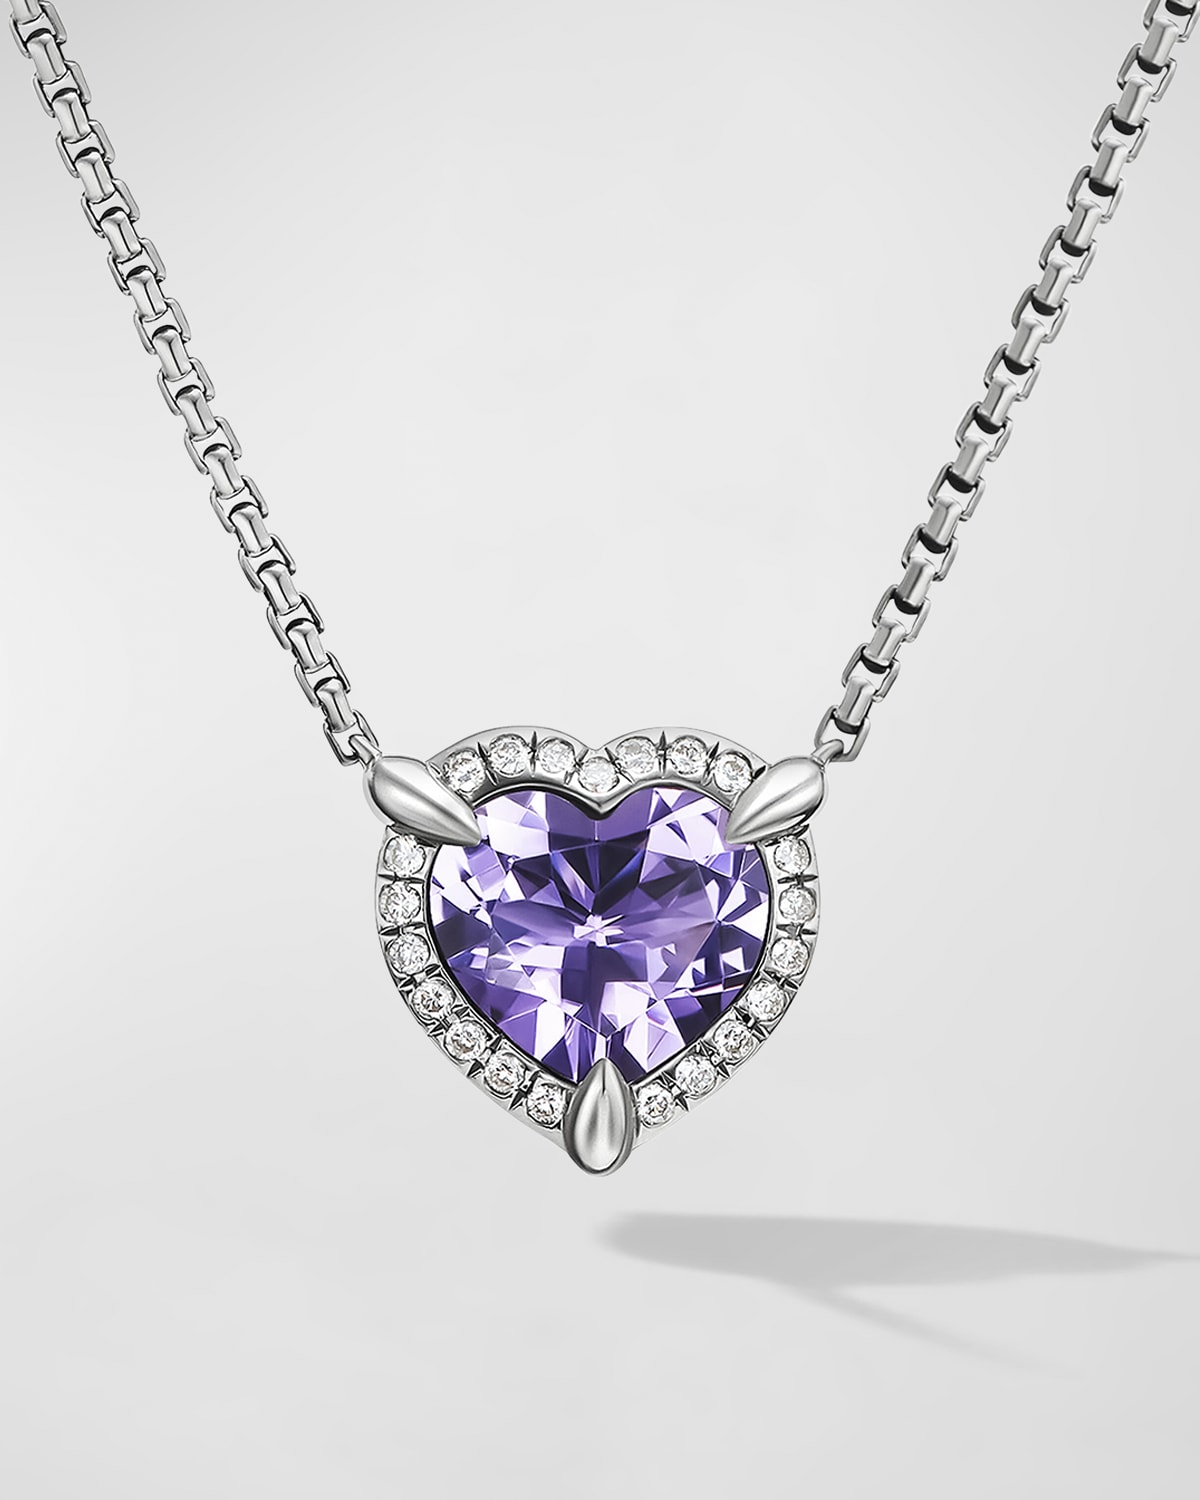 Chatelaine Heart Pendant Necklace with Gemstone and Diamonds in Silver, 10.3mm